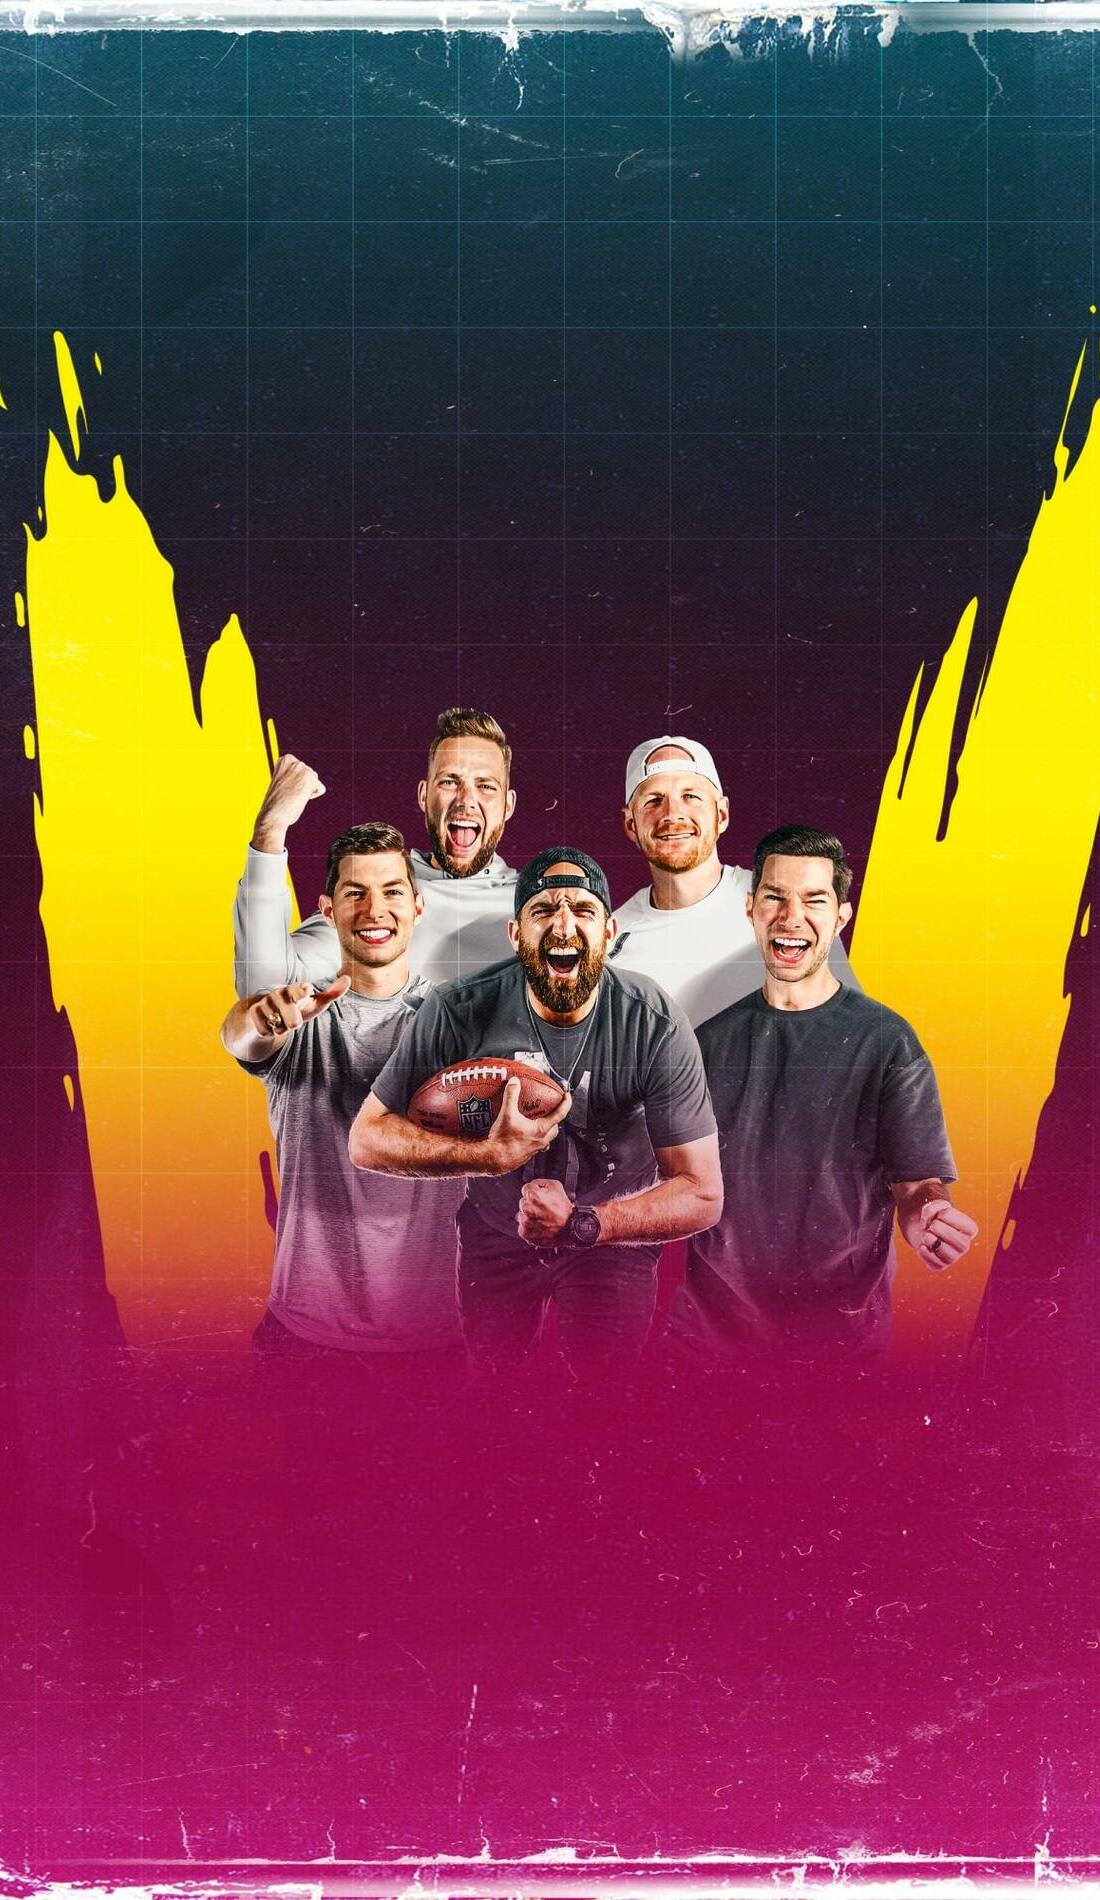 A DUDE PERFECT live event